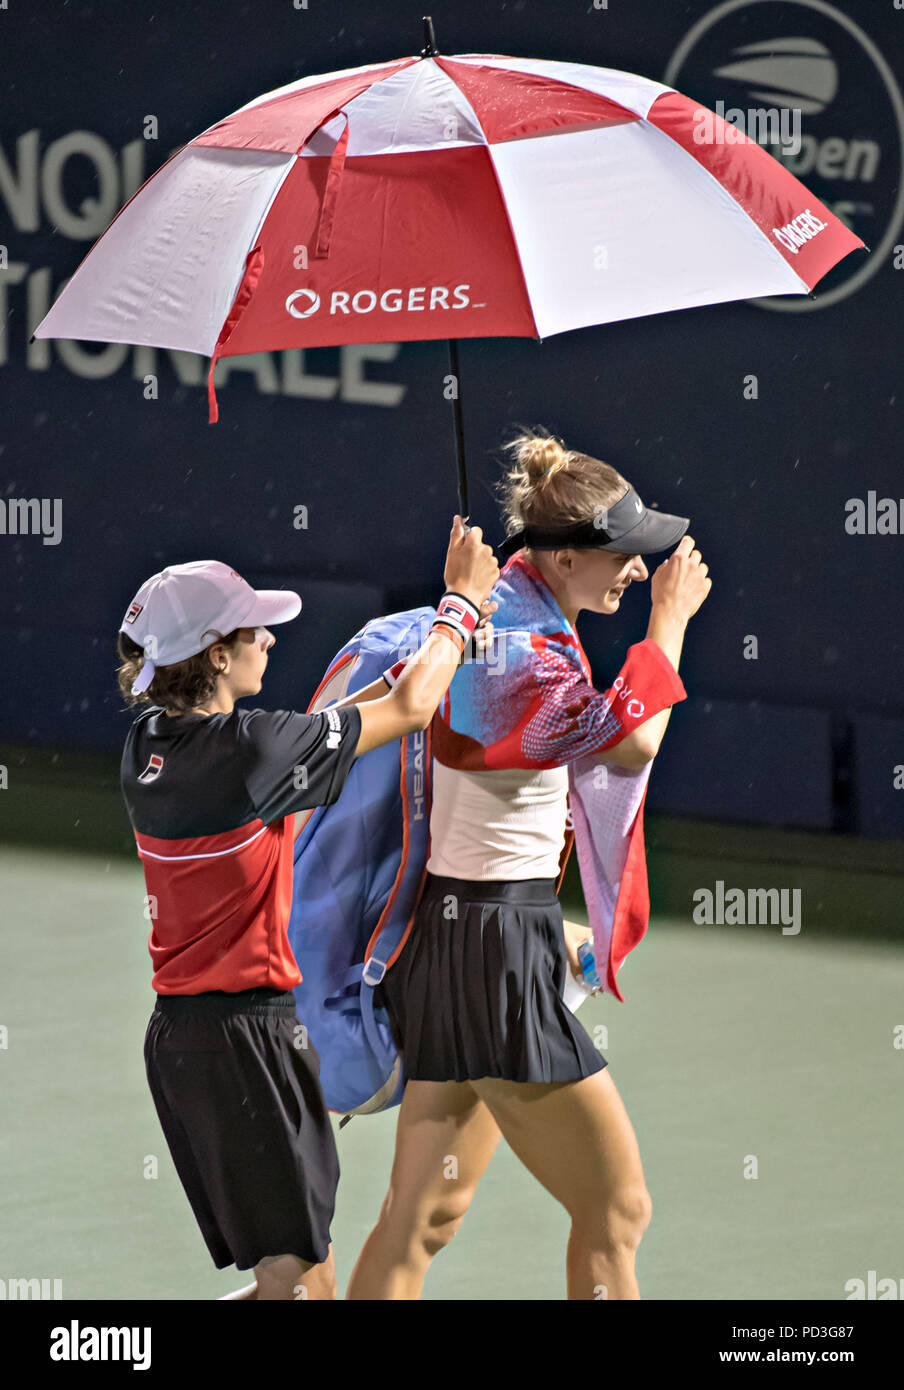 Montreal. 6th Aug, 2018. Sesil Karatantcheva (R) of Bulgaria is escorted off the main court with an umbrella during the first round of women's singles match of the 2018 Rogers Cup in Montreal, Aug. 6, 2018. Remaining competitions here on Aug. 6, 2018 have been cancelled due to rainfall. Credit: Andrew Soong/Xinhua/Alamy Live News Stock Photo